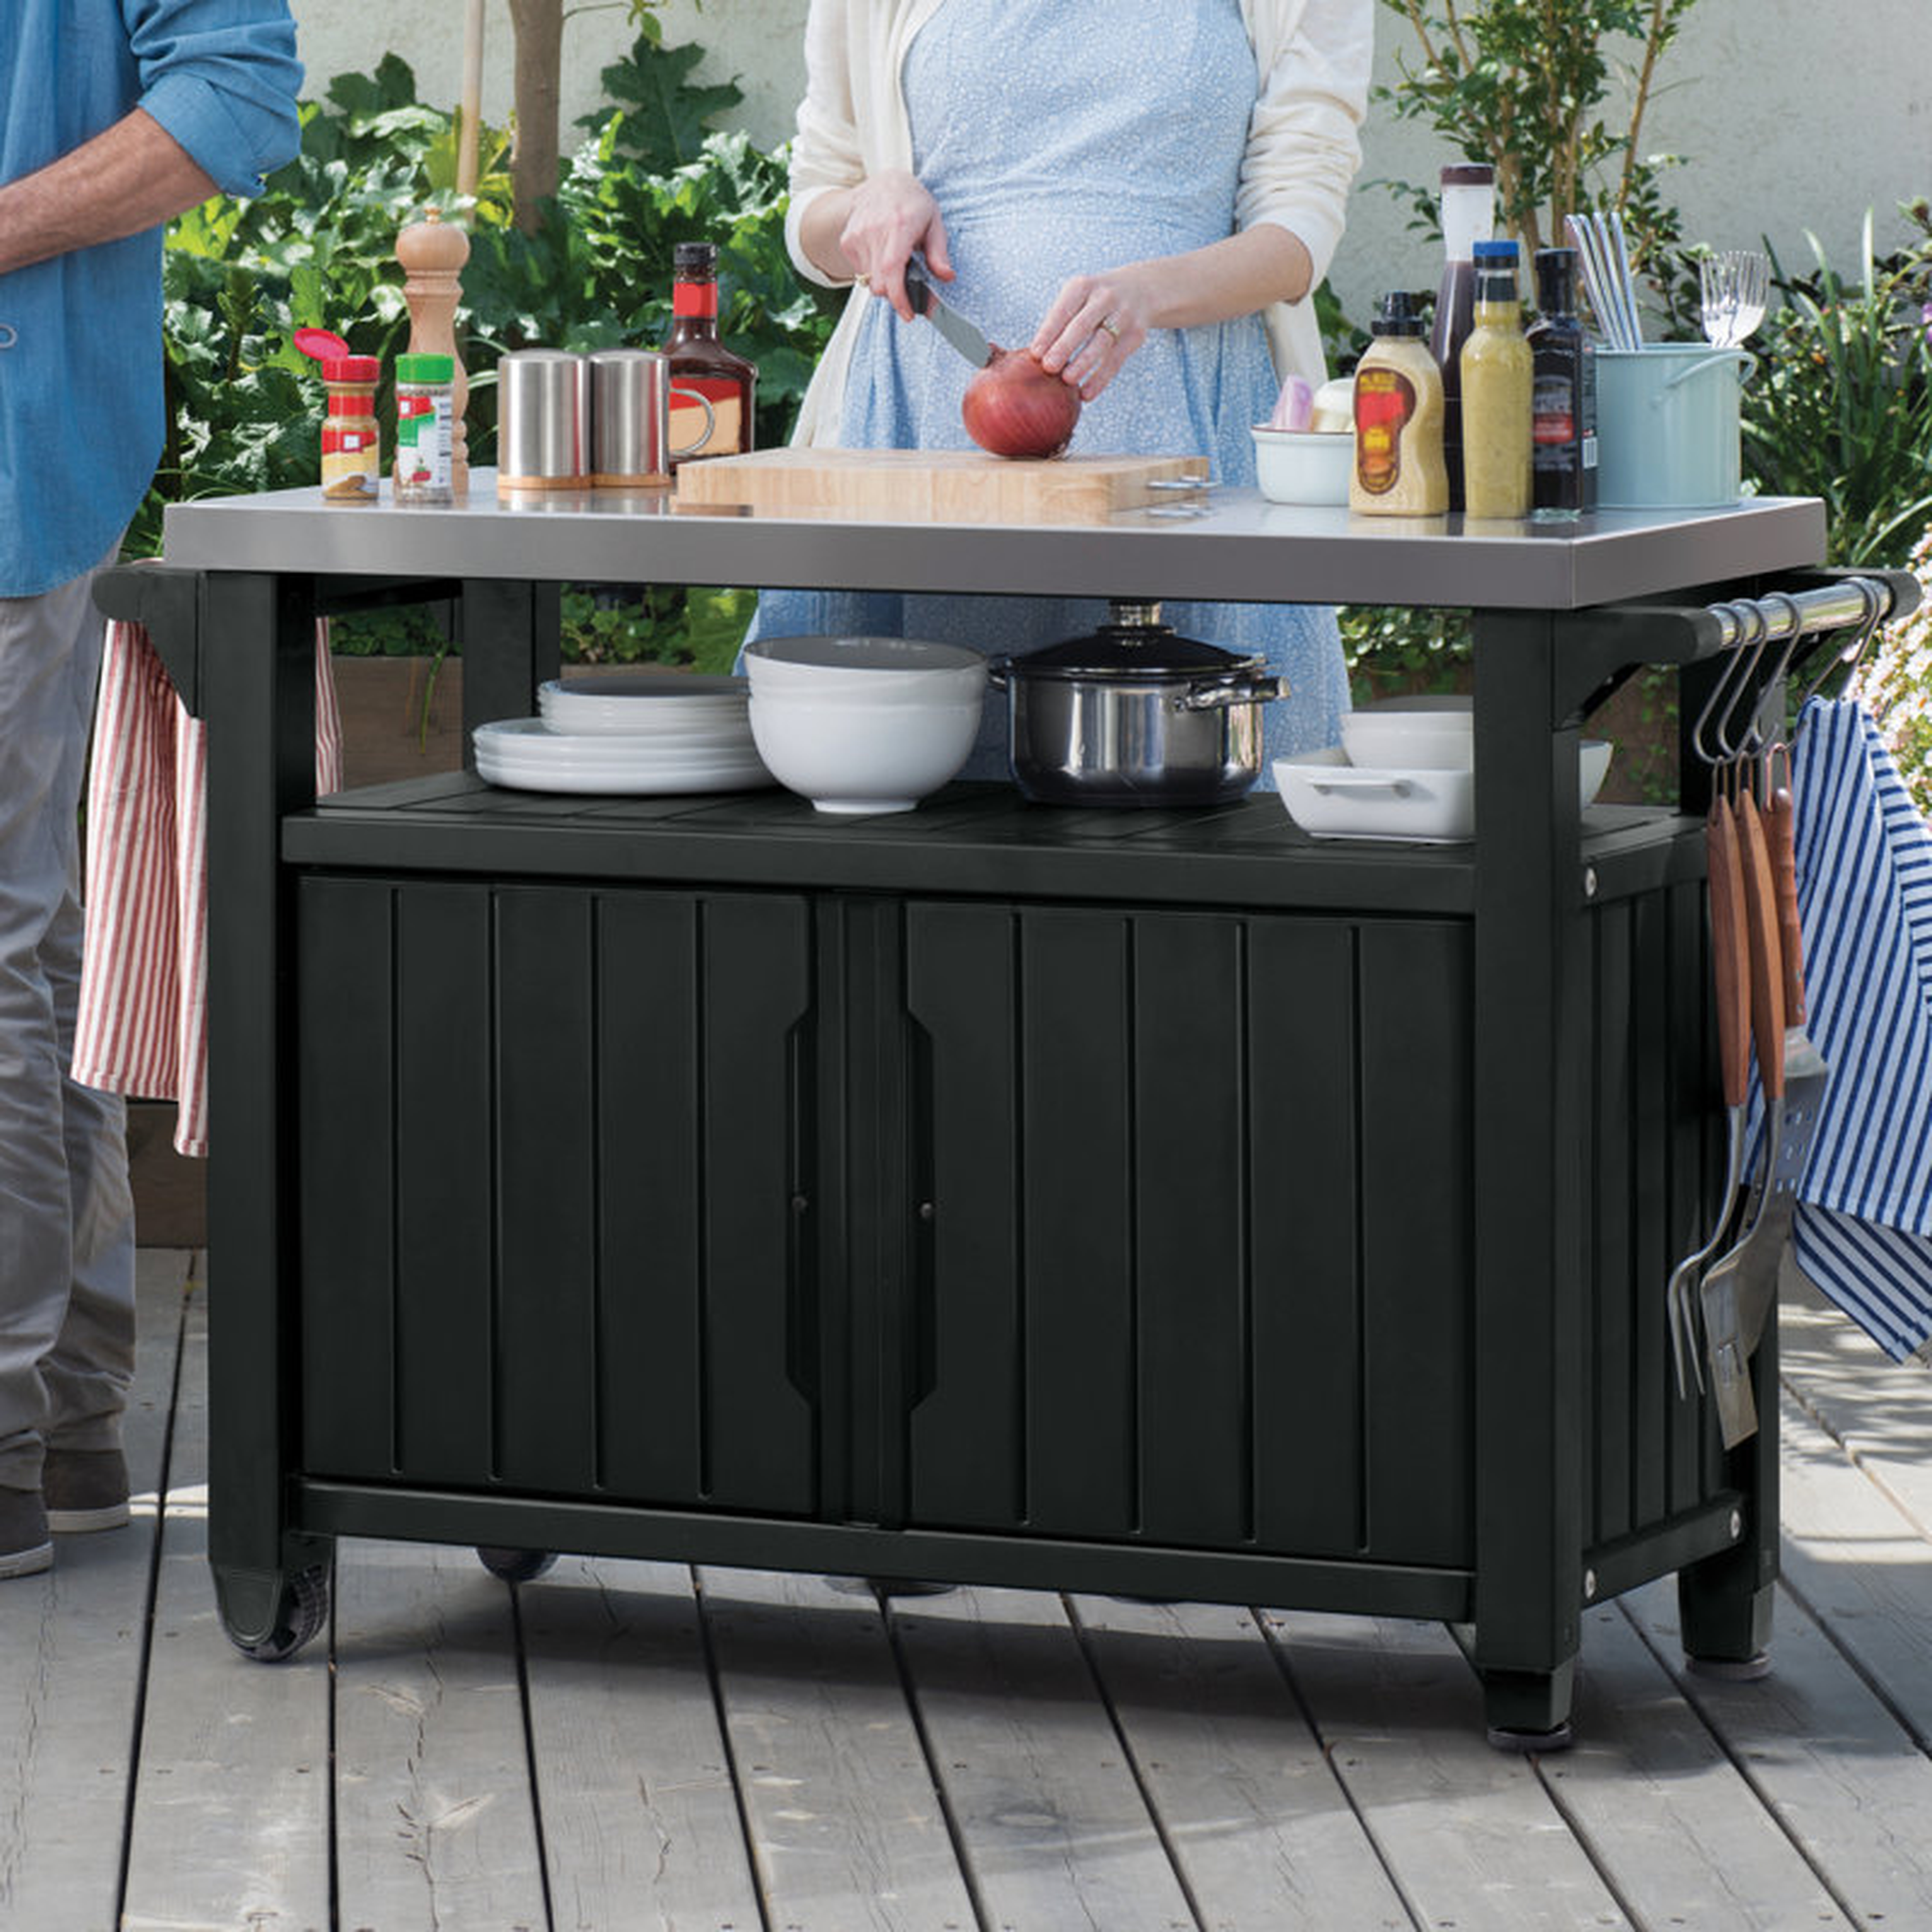 Arrilla Bar Cart Made of Durable Wood-look Resin And Stainless Steel Countertop - Wayfair